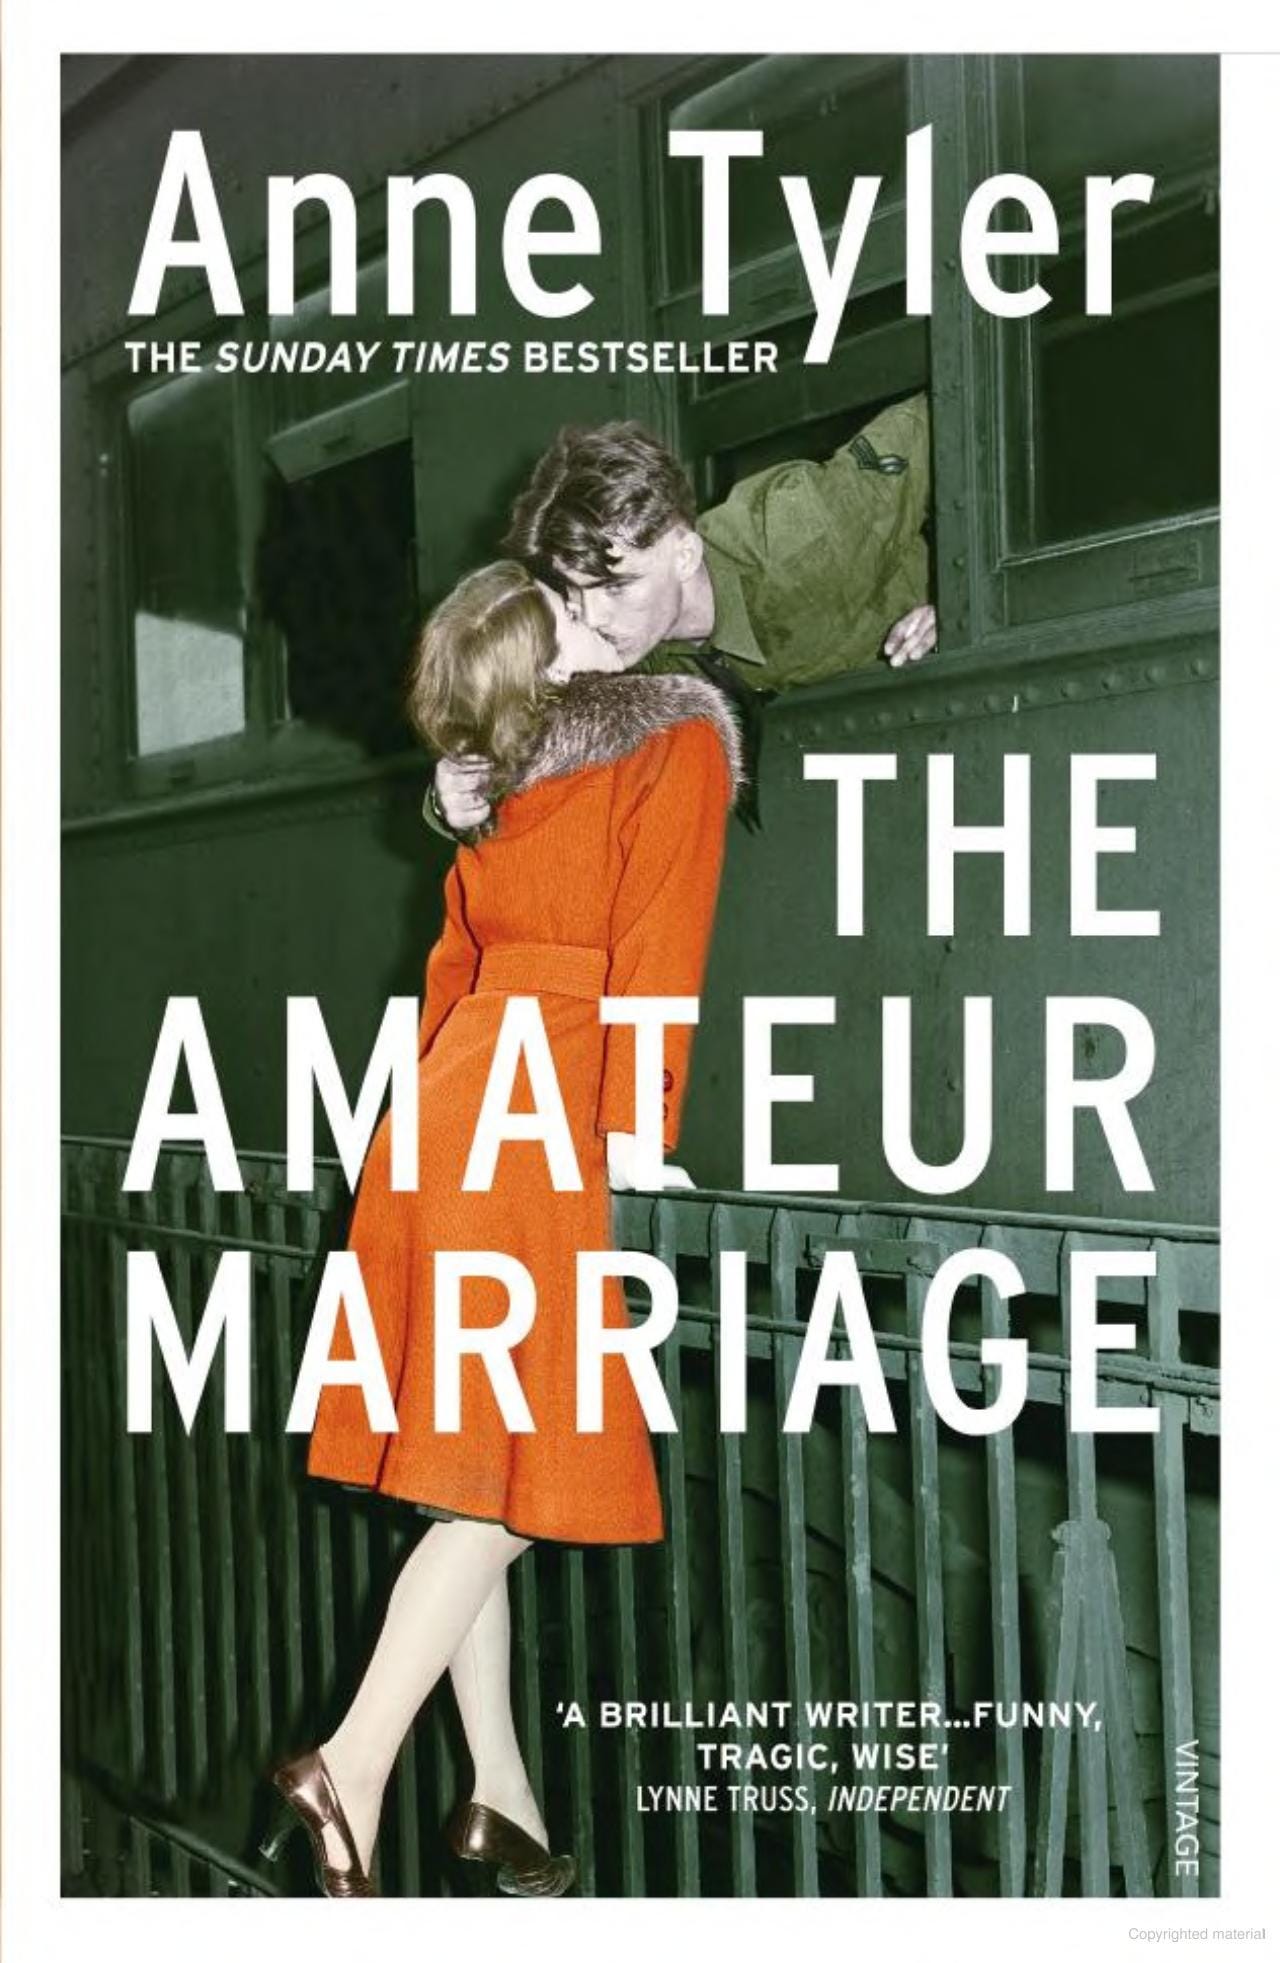 Picture of the cover of The Amateur Marriage, featuring a soldier leaning out of a train to kiss a woman in a red coat